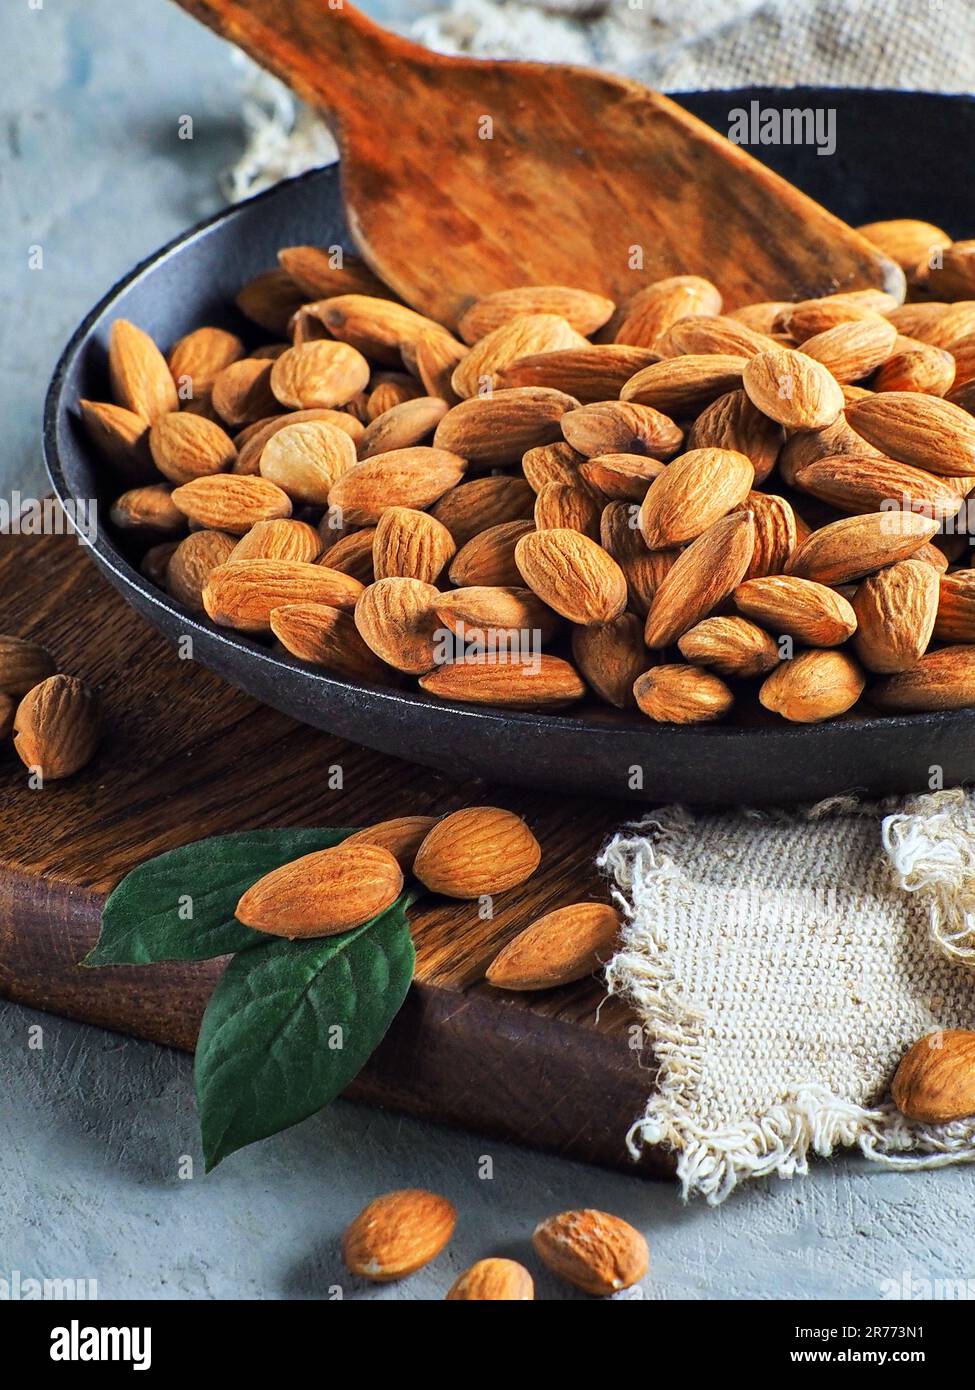 Selected peeled almond kernels lie in a black frying pan. Still life for promotional products for marketplaces or online stores. Useful nut for a healthy balanced diet. Stock Photo